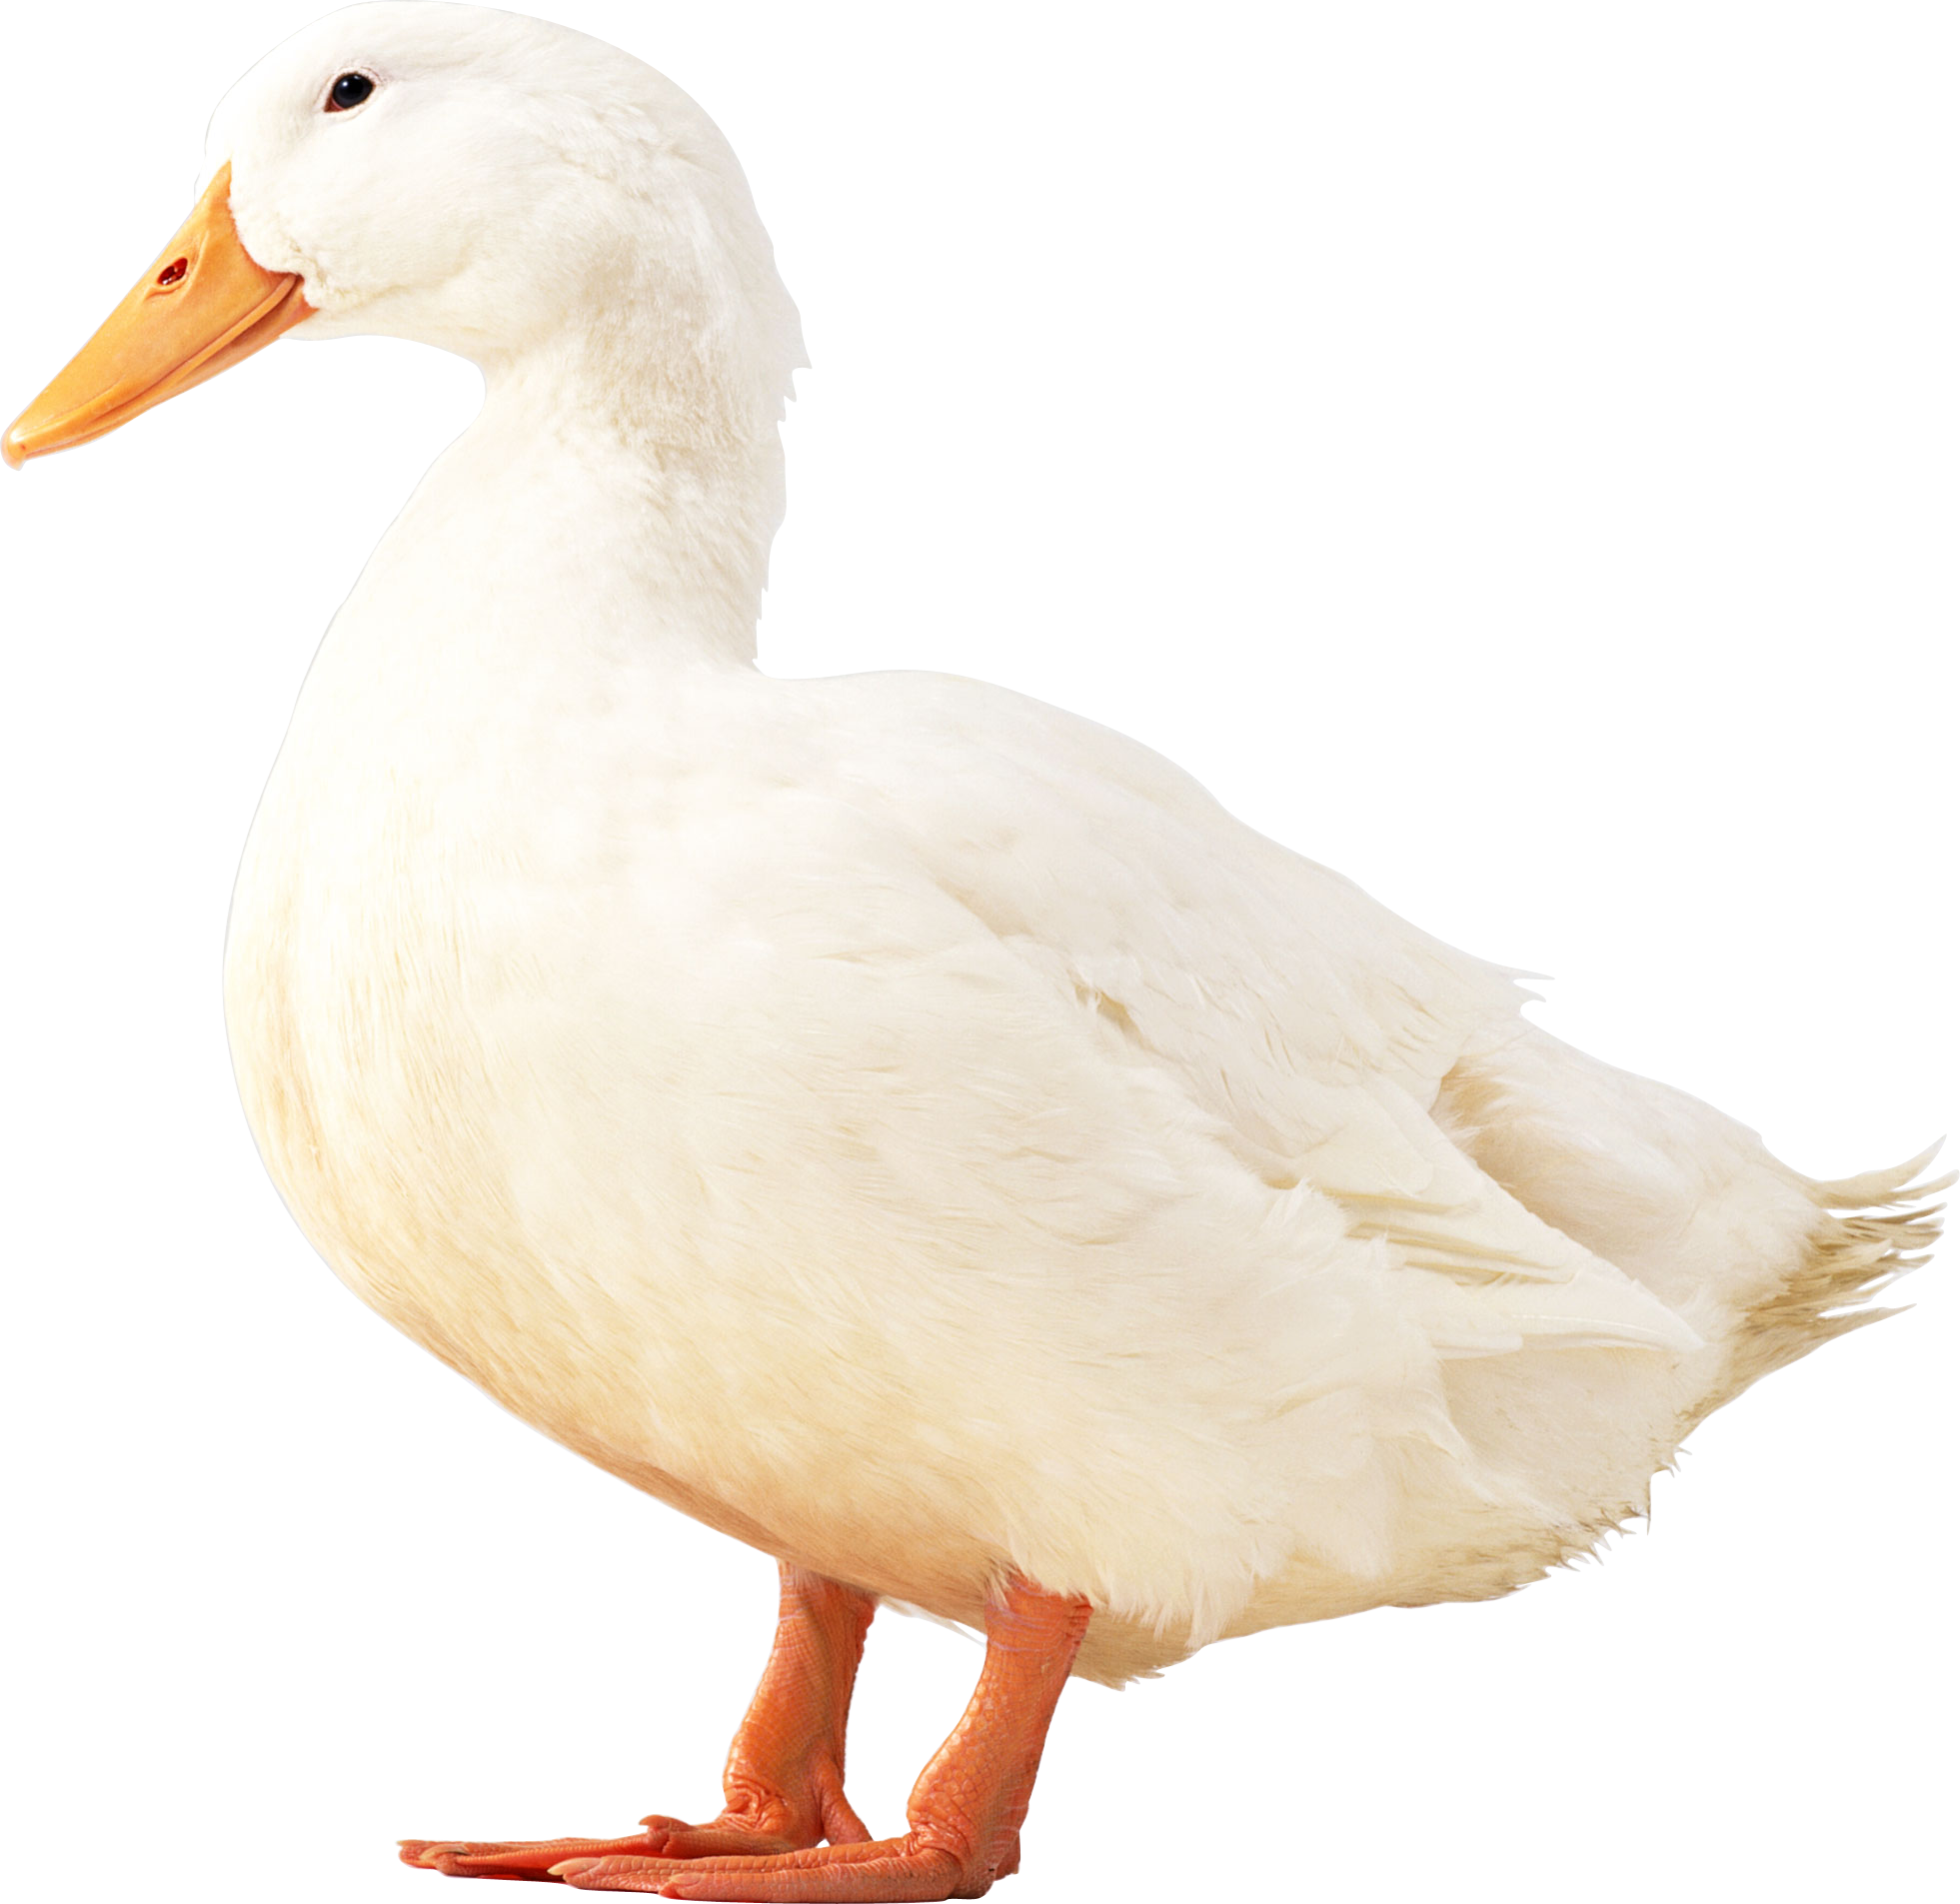 White Duck PNG Image - PurePNG | Free transparent CC0 PNG Image Library